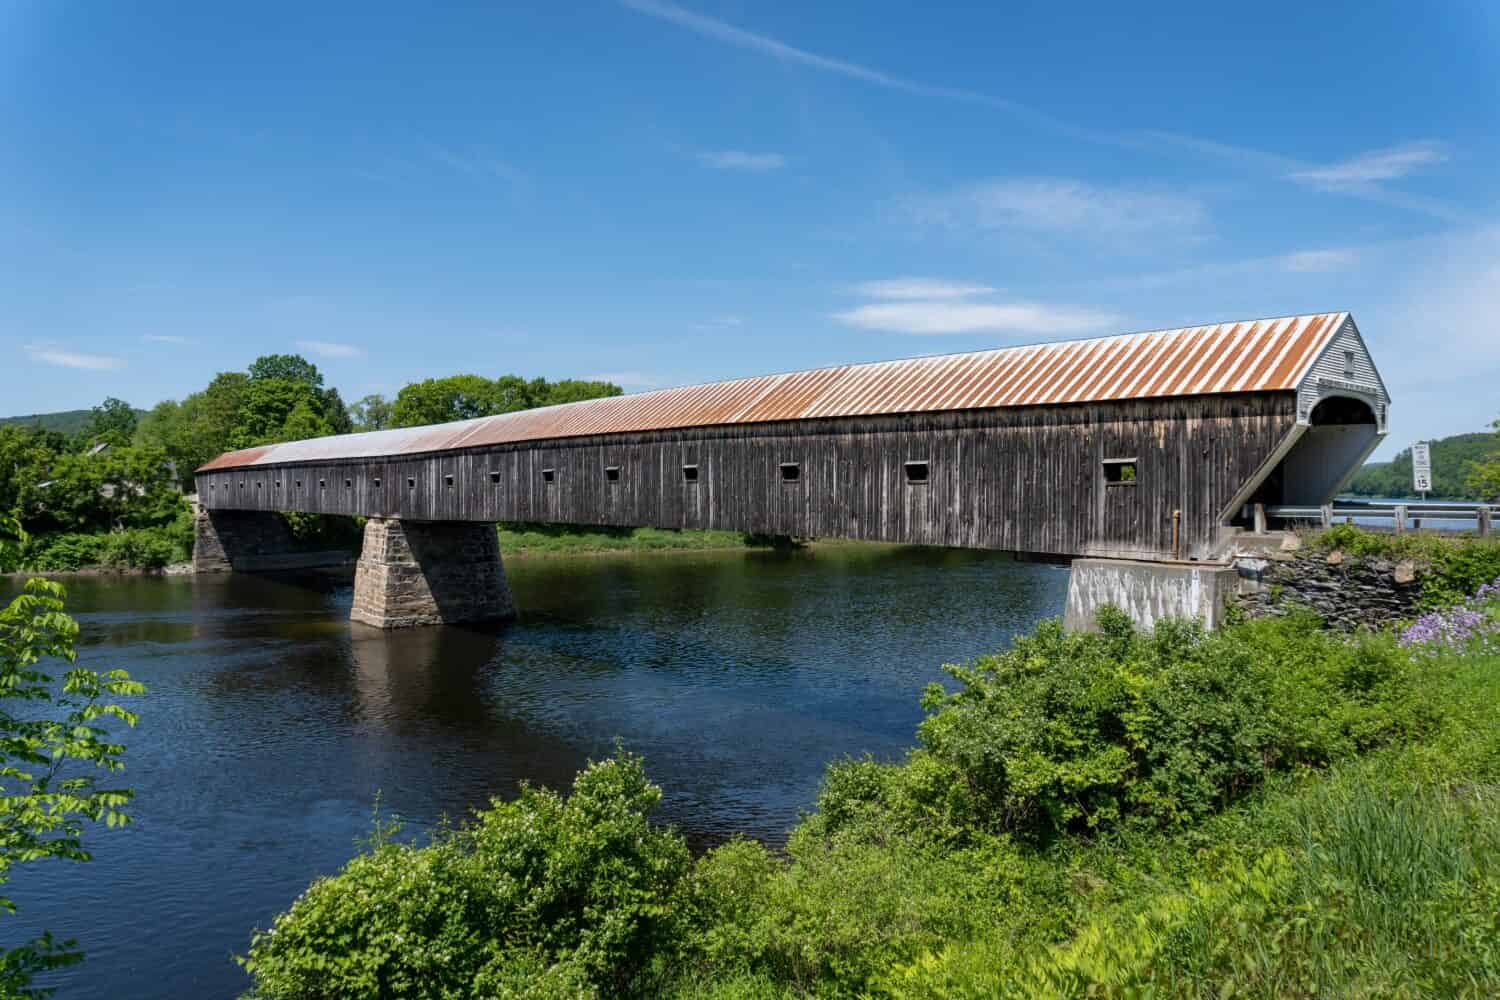 Cornish-Windsor Covered Bridge. Built in 1866, longest two-span covered bridge. Site of General Lafayette's crossing. Crosses Connecticut River between Cornish, New Hampshire, and Windsor, Vermont.